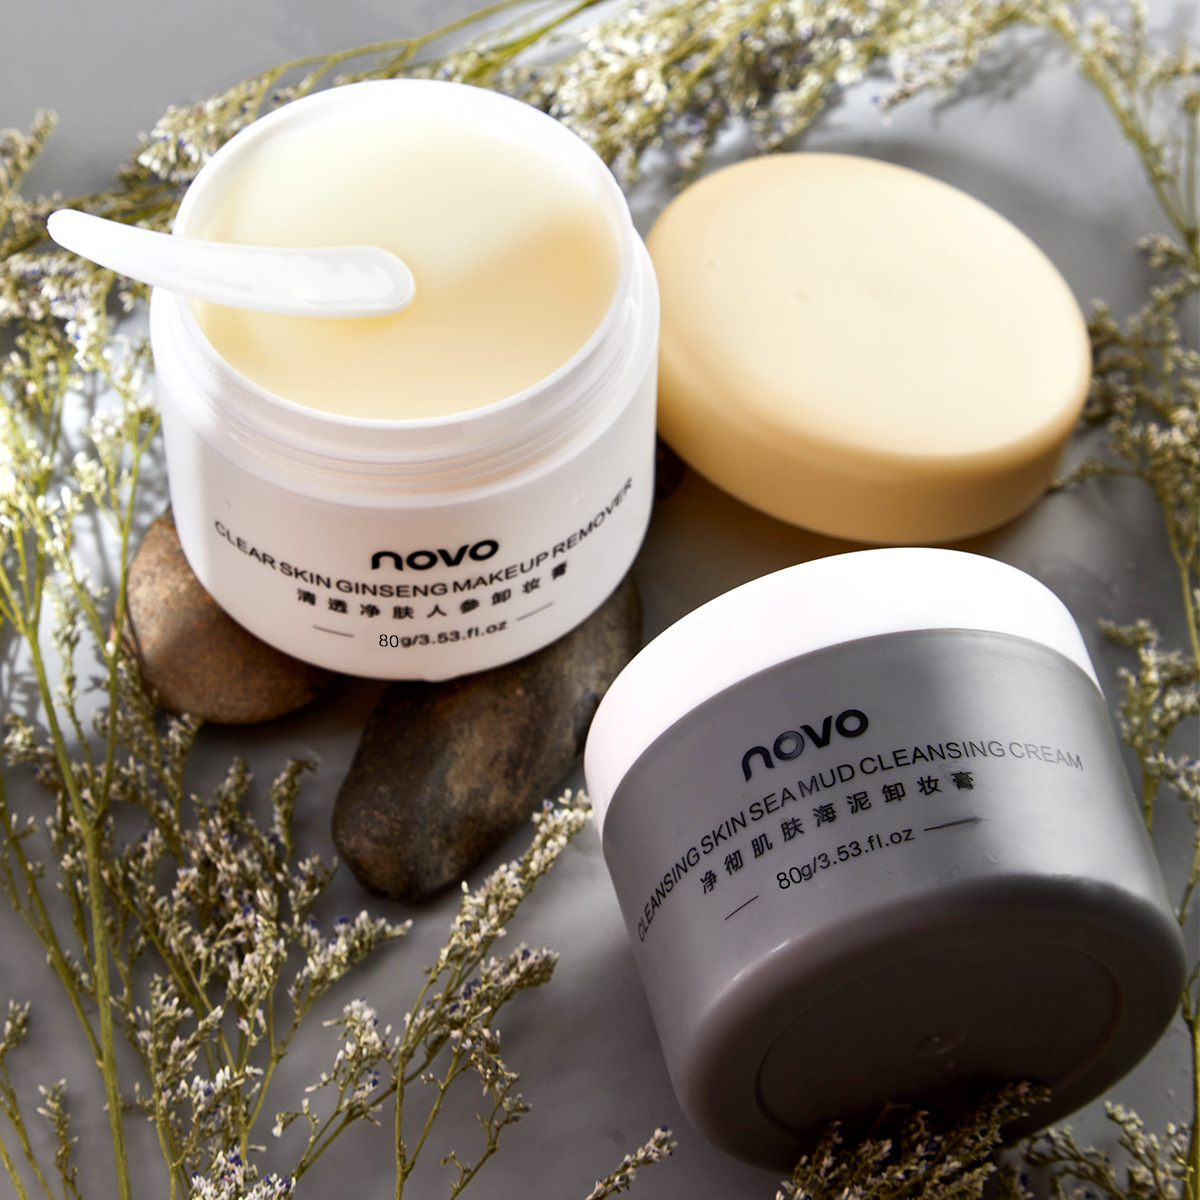 novo ice cream milky cleansing cream face deep cleansing mild and non-irritating exfoliating eyes， lips and face three-in-one